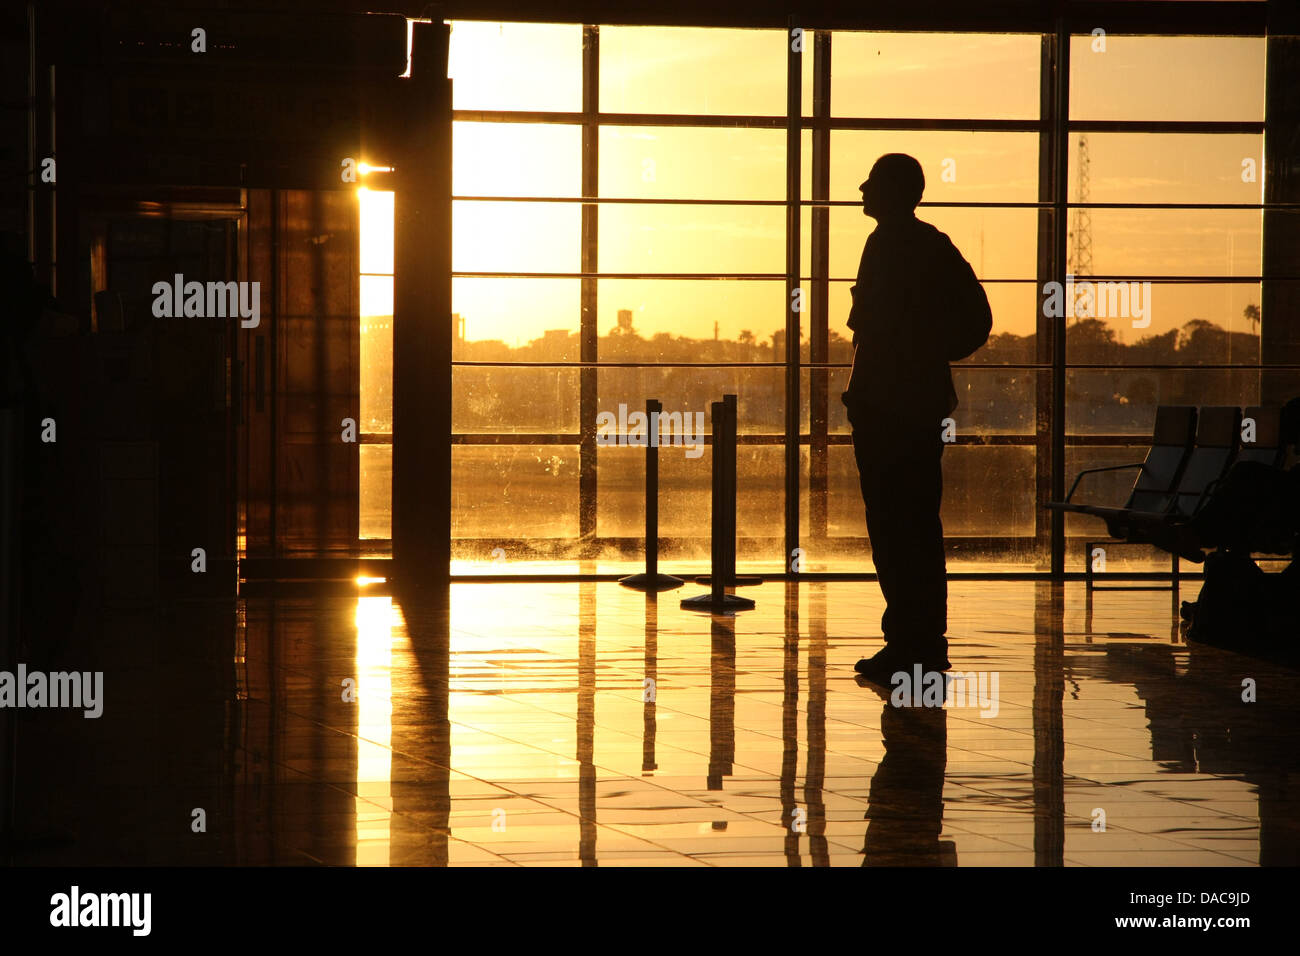 Man in profile waiting at an airport with a golden sunset Stock Photo